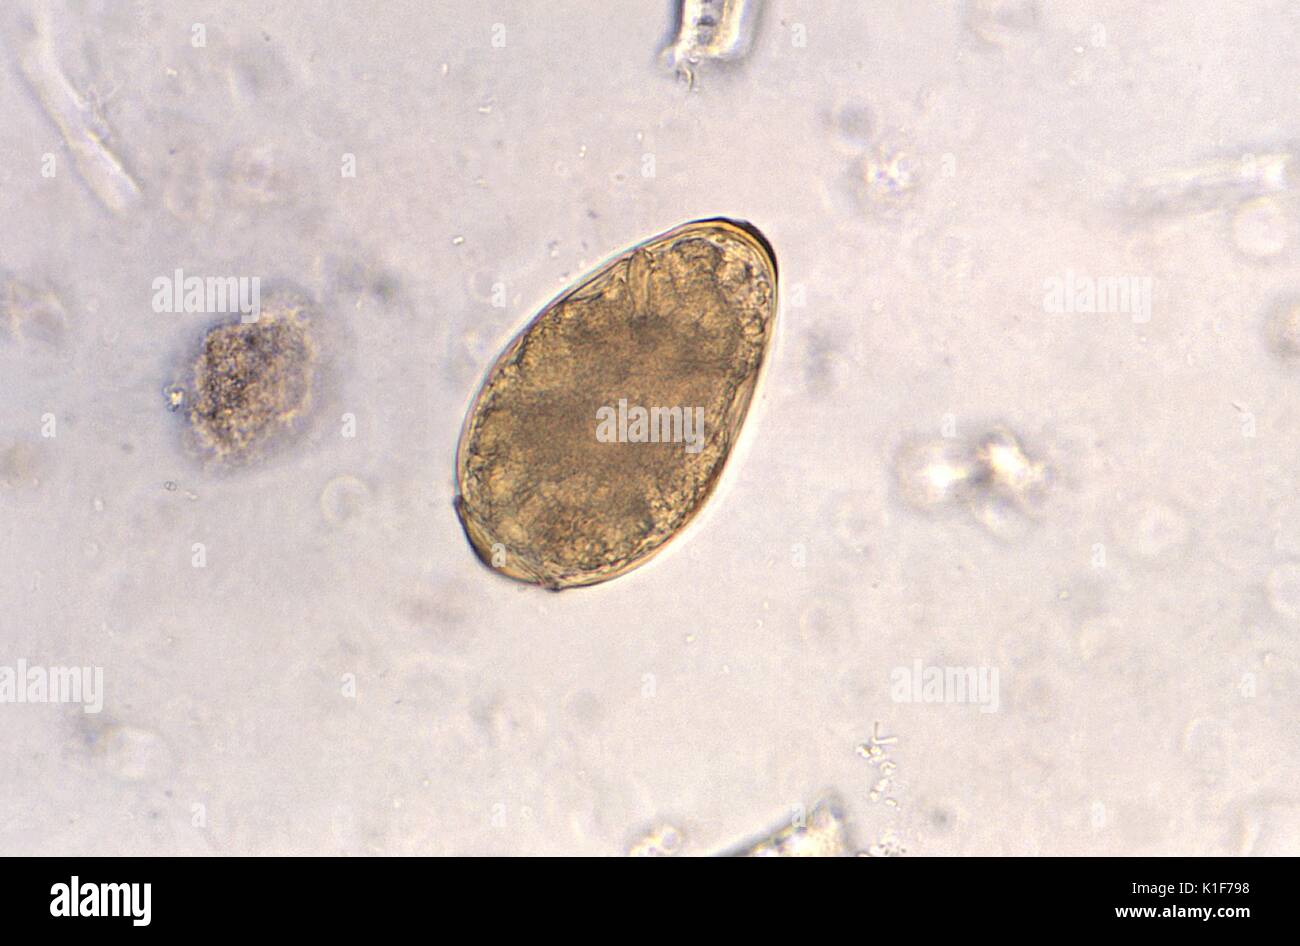 Magnified 400X, this photomicrograph revealed some of the ultrastructural morphology of a single trematode Paragonimus westermani egg. P. westermani eggs range from 80{micro}m to 120{micro}m long by 45{micro}m to 70{micro}m wide. They are yellow-brown, ovoid or elongate, with a thick shell, and often asymmetrical with one end slightly flattened. At the large end, the operculum is clearly visible. The opposite (abopercular) end is thickened. The eggs are unembryonated when passed in sputum or feces. See PHIL 10855 for another view of this egg. <b><u>Clinical Features:</u></b>. Image courtesy CD Stock Photo